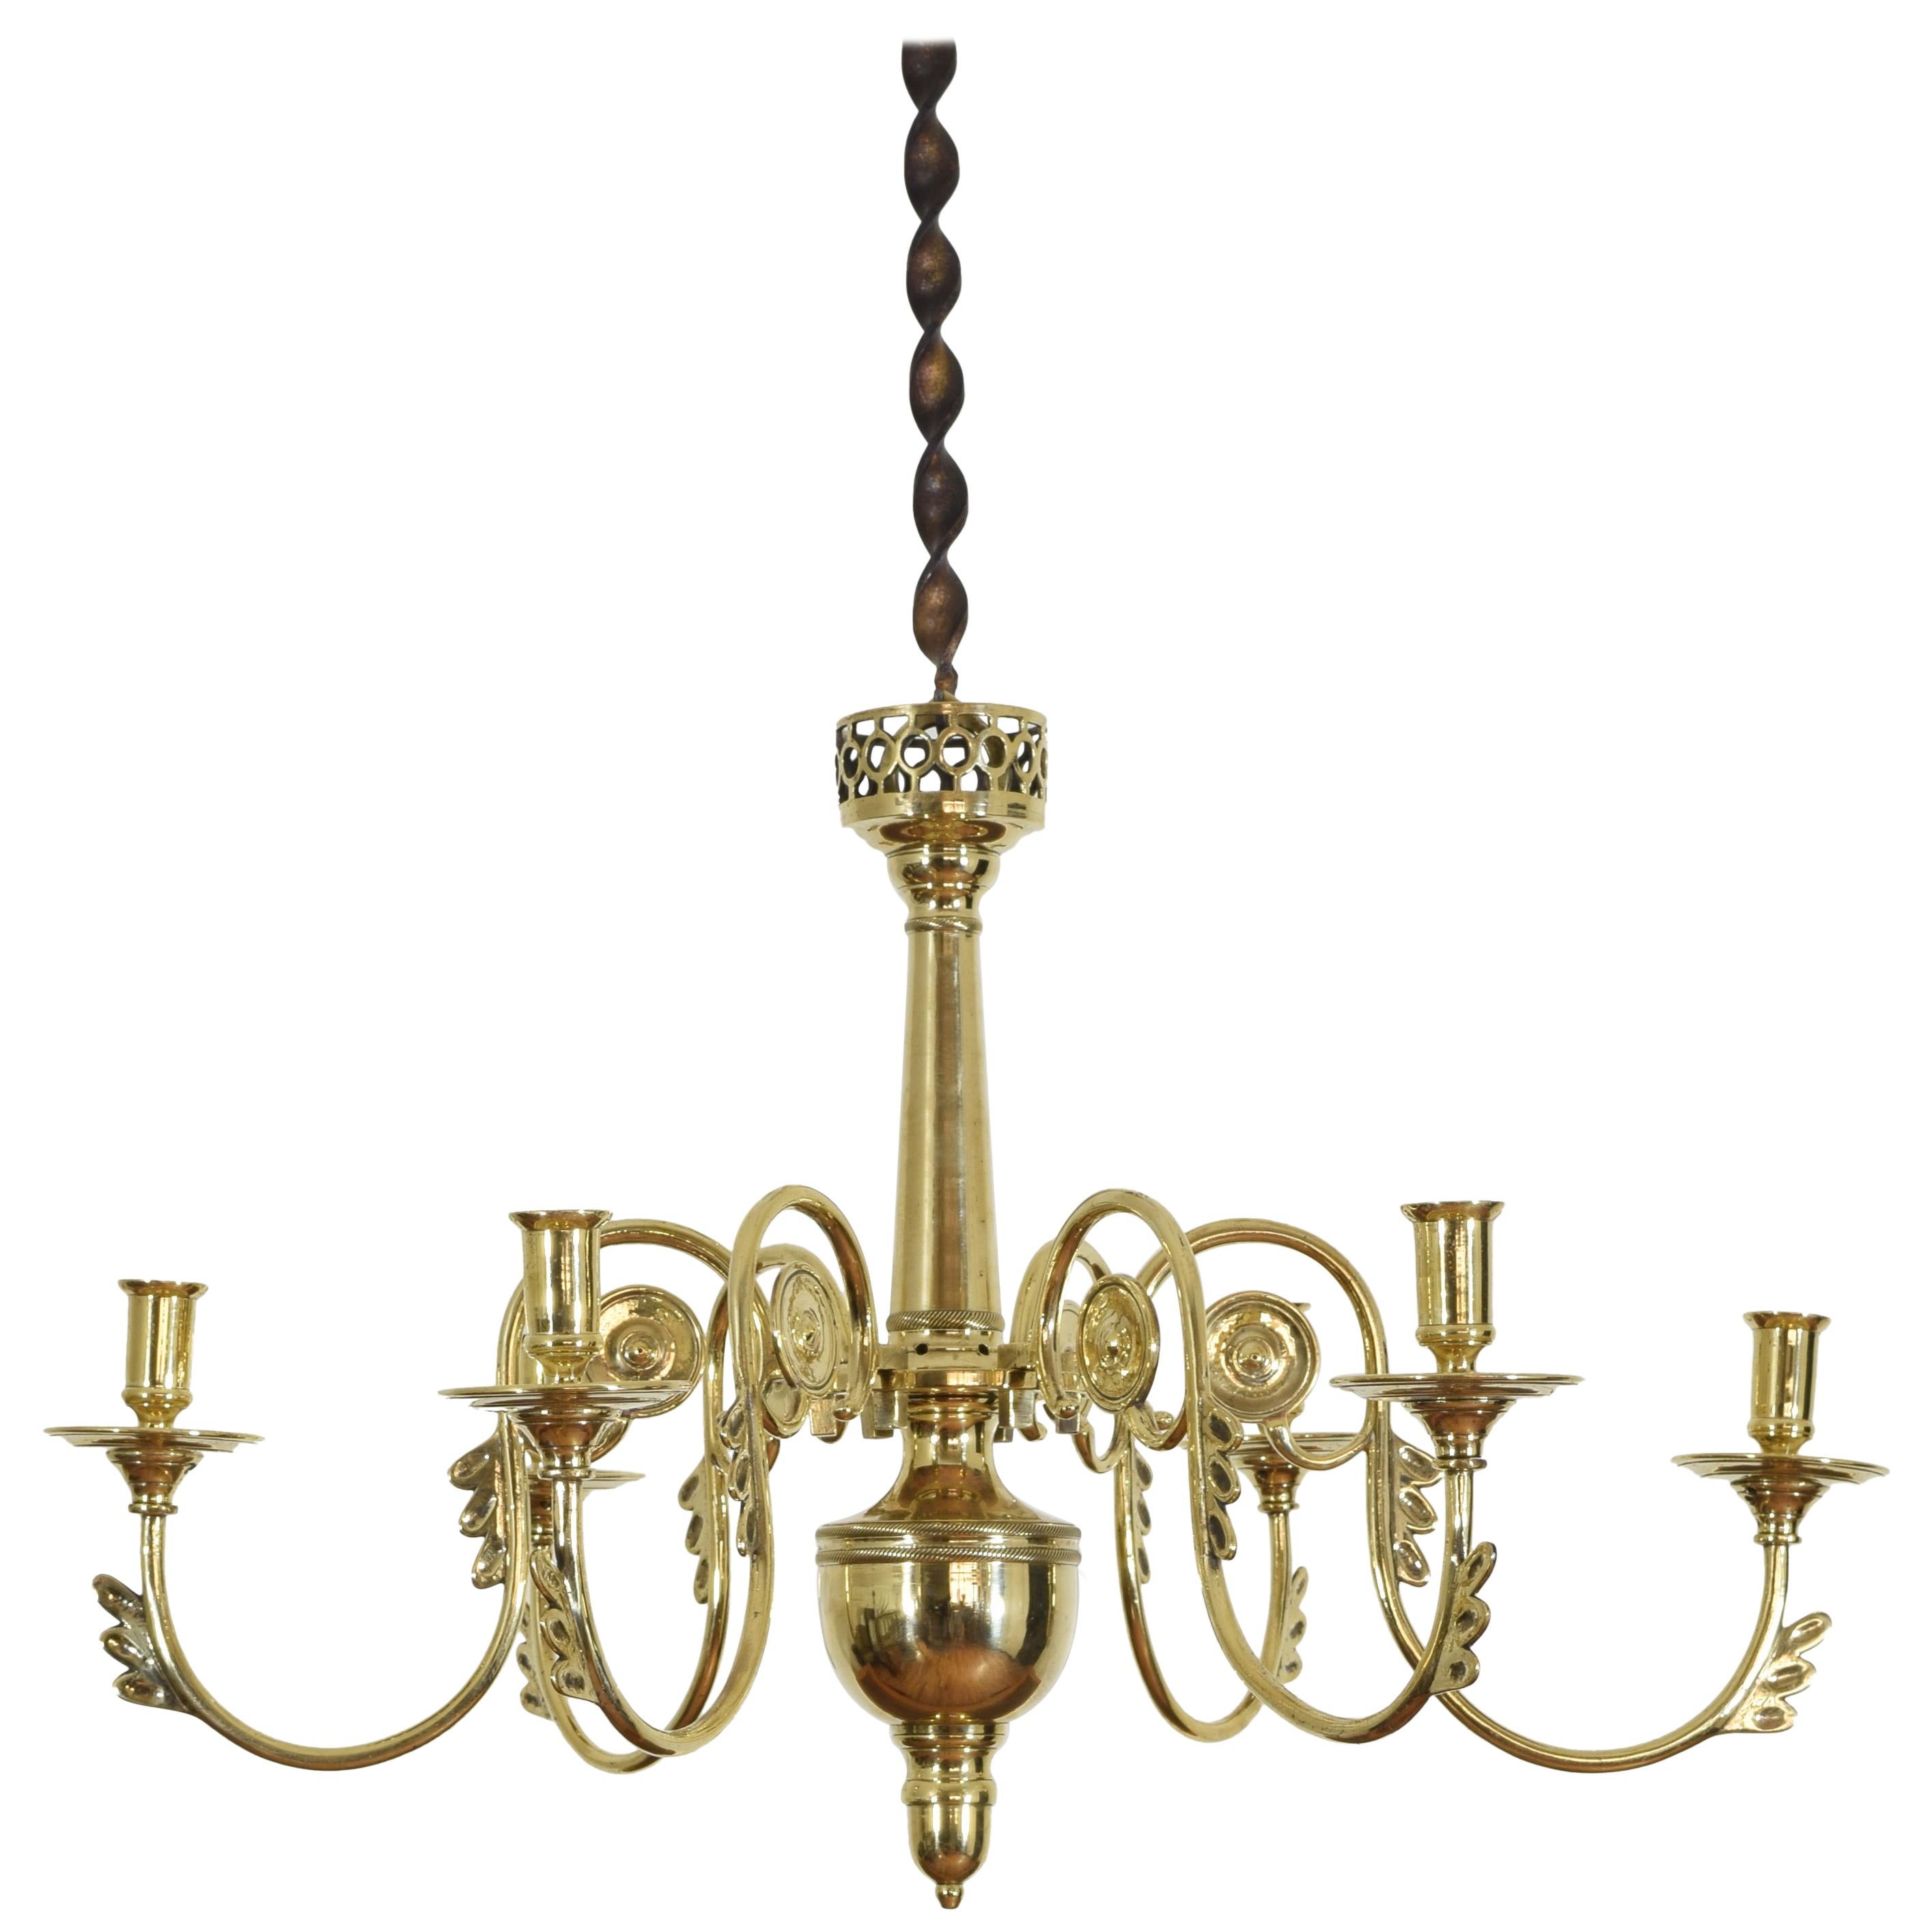 French Empire Cast Brass 6-Light Chandelier from the Early 19th Century